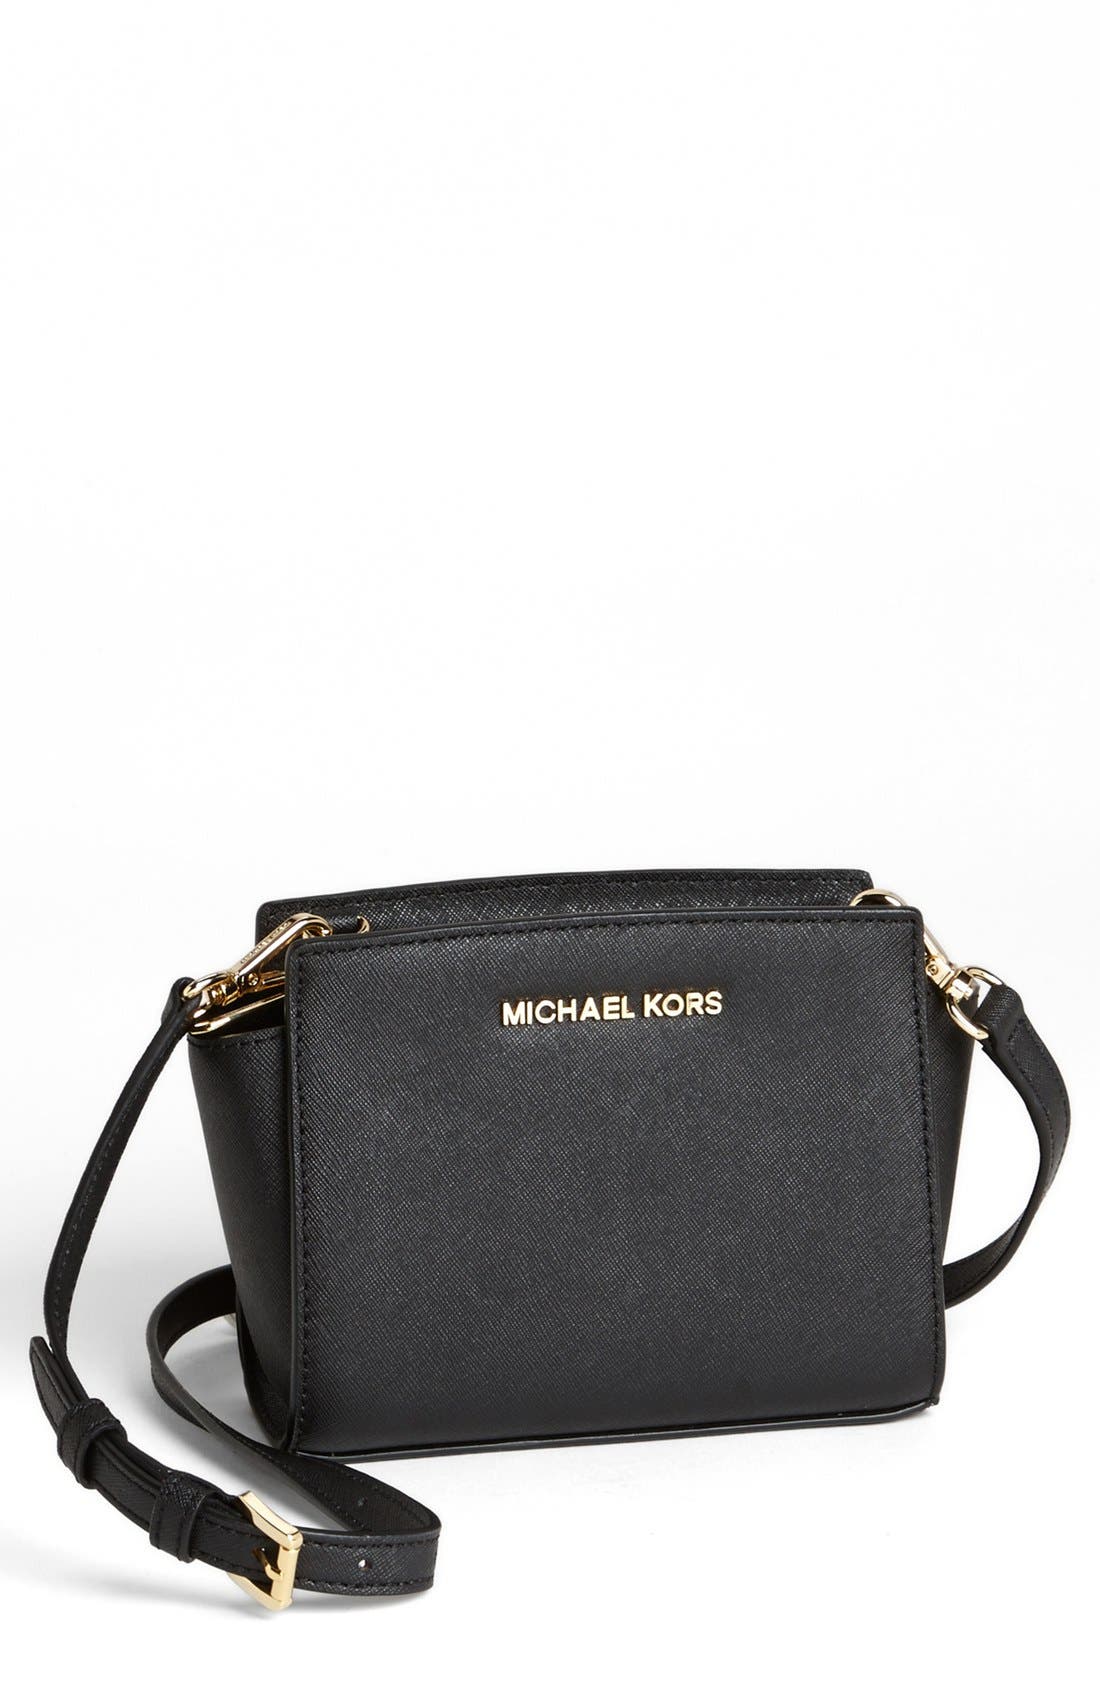 michael kors purse for toddler \u003e Up to 